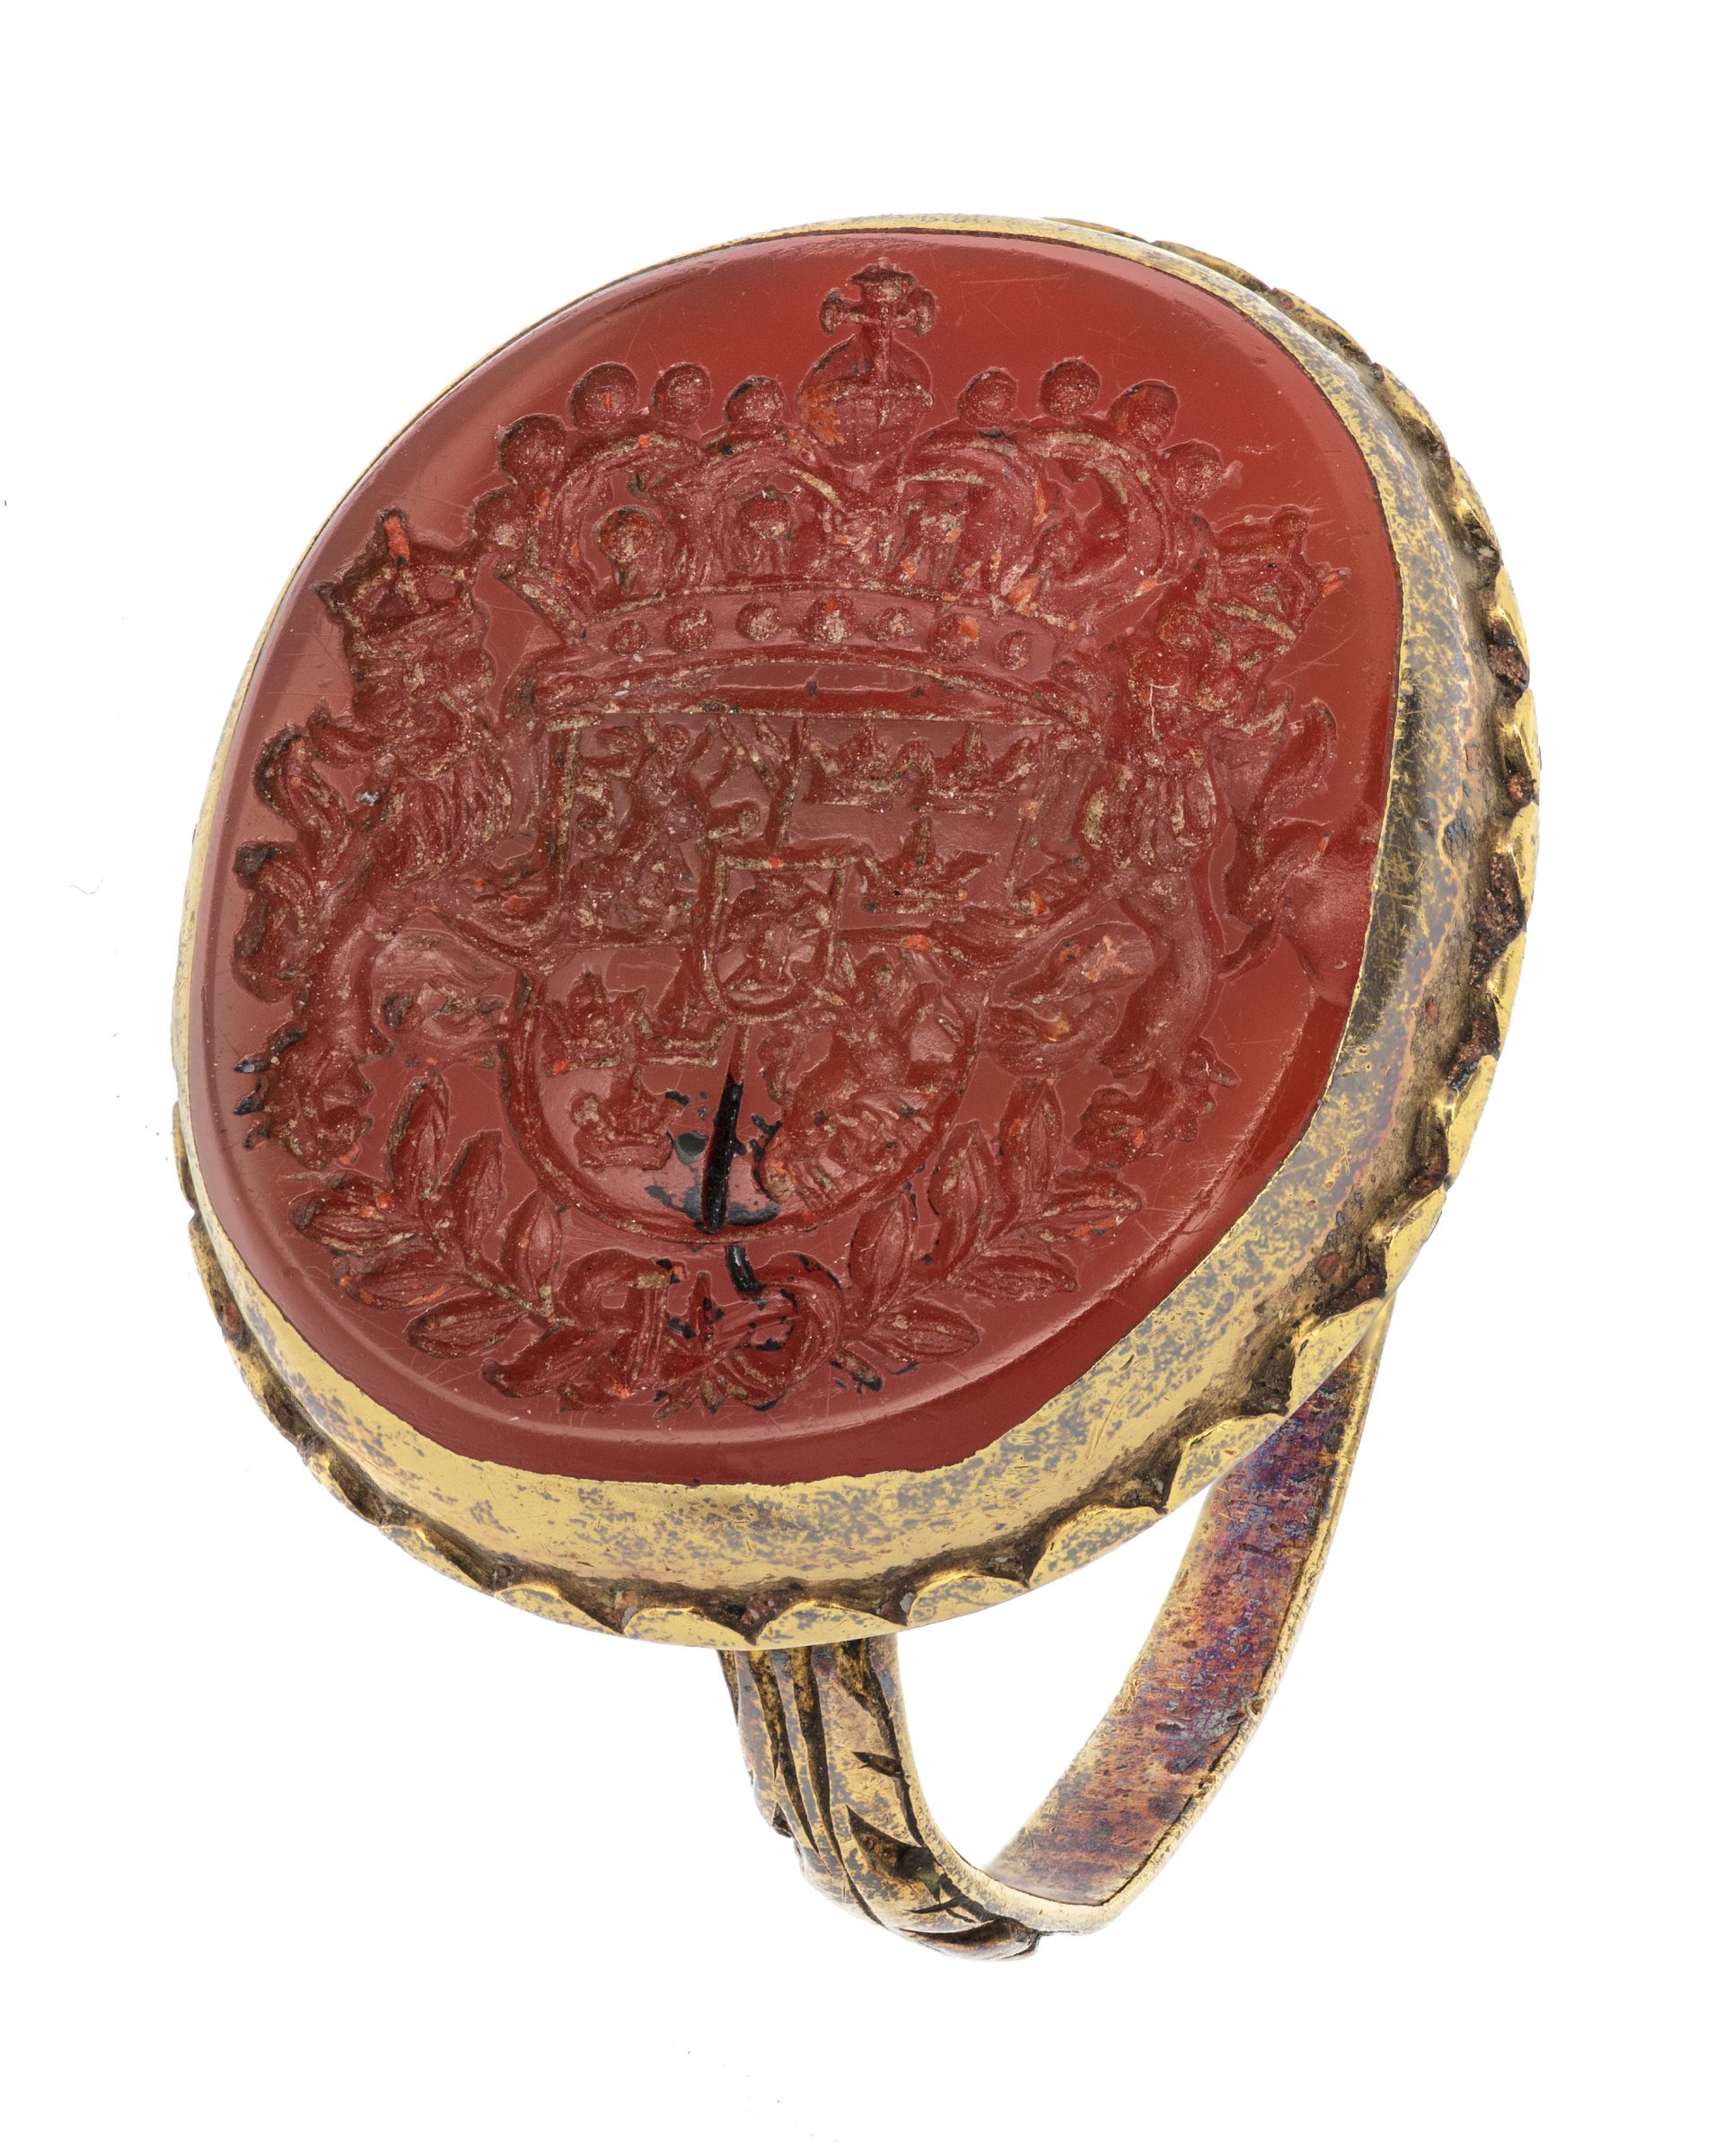 A signet ring of gold with a red stone.